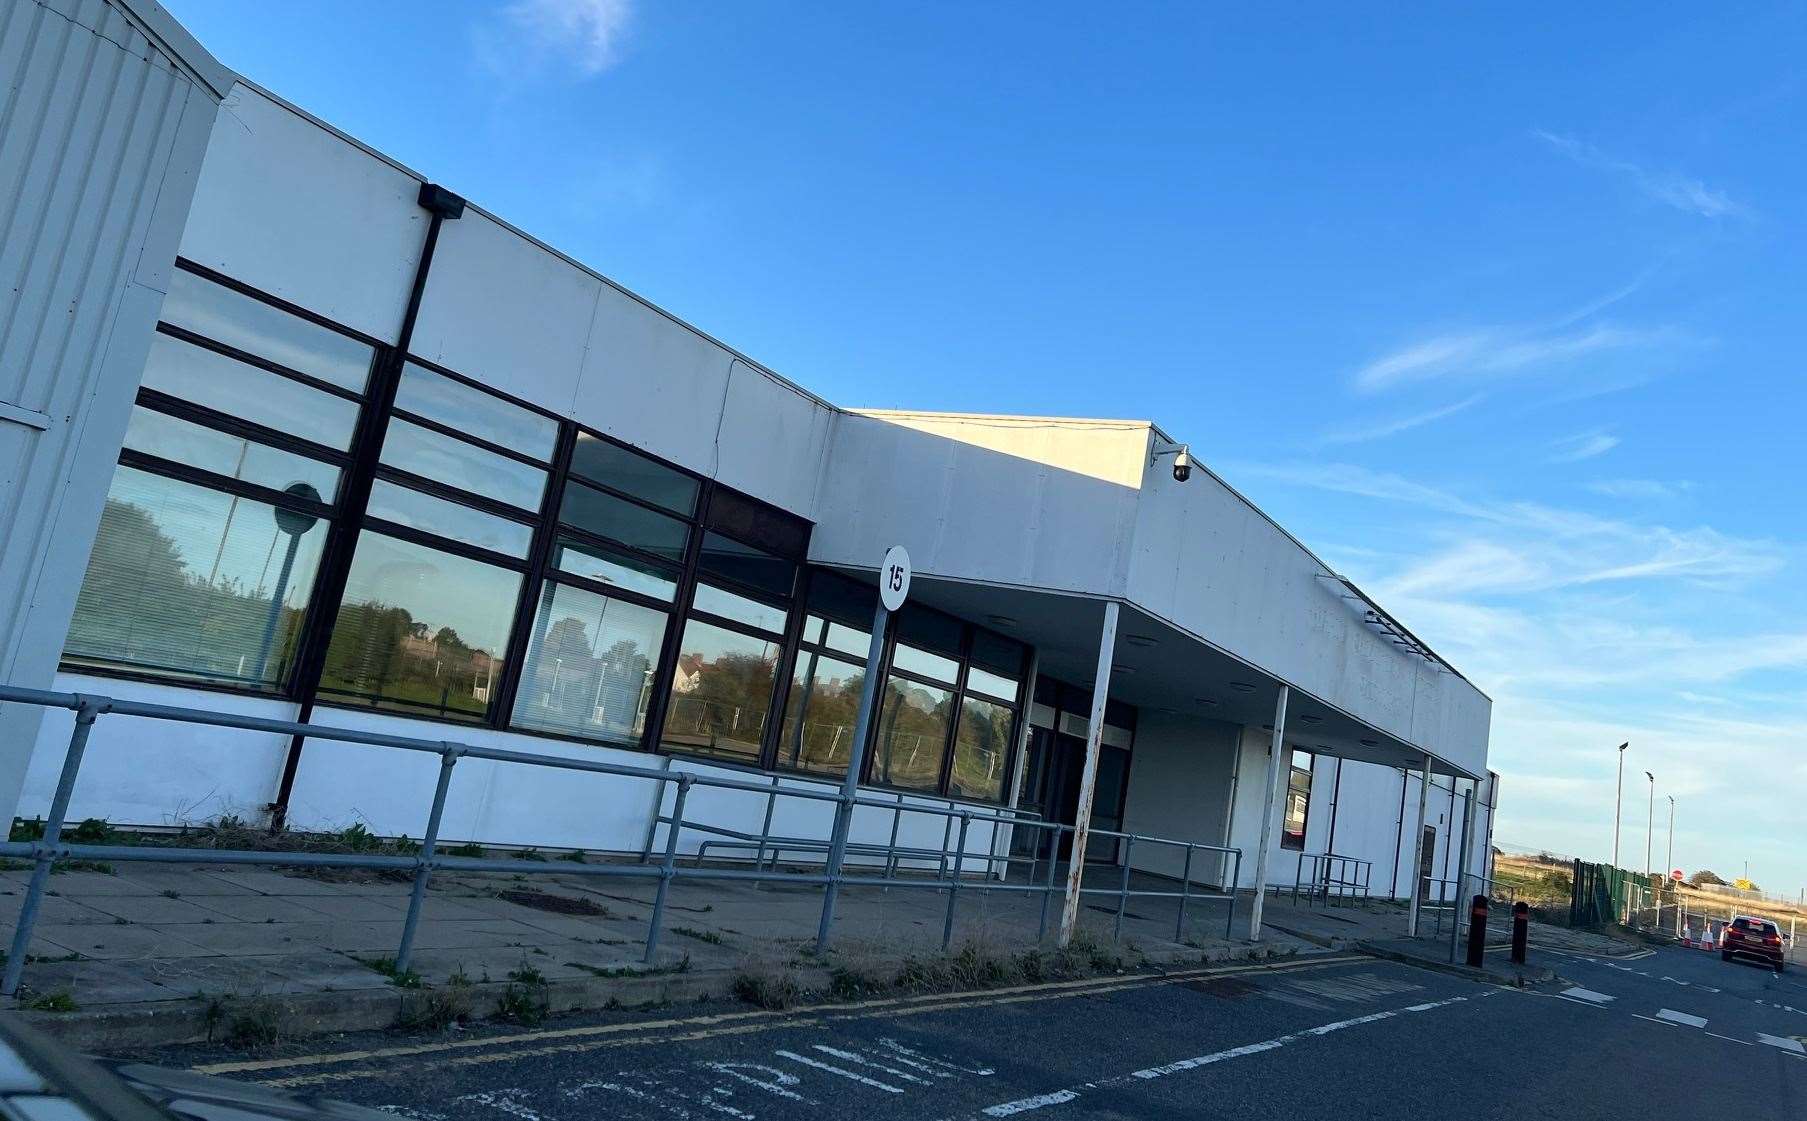 The old passenger terminal building at Manston Airport